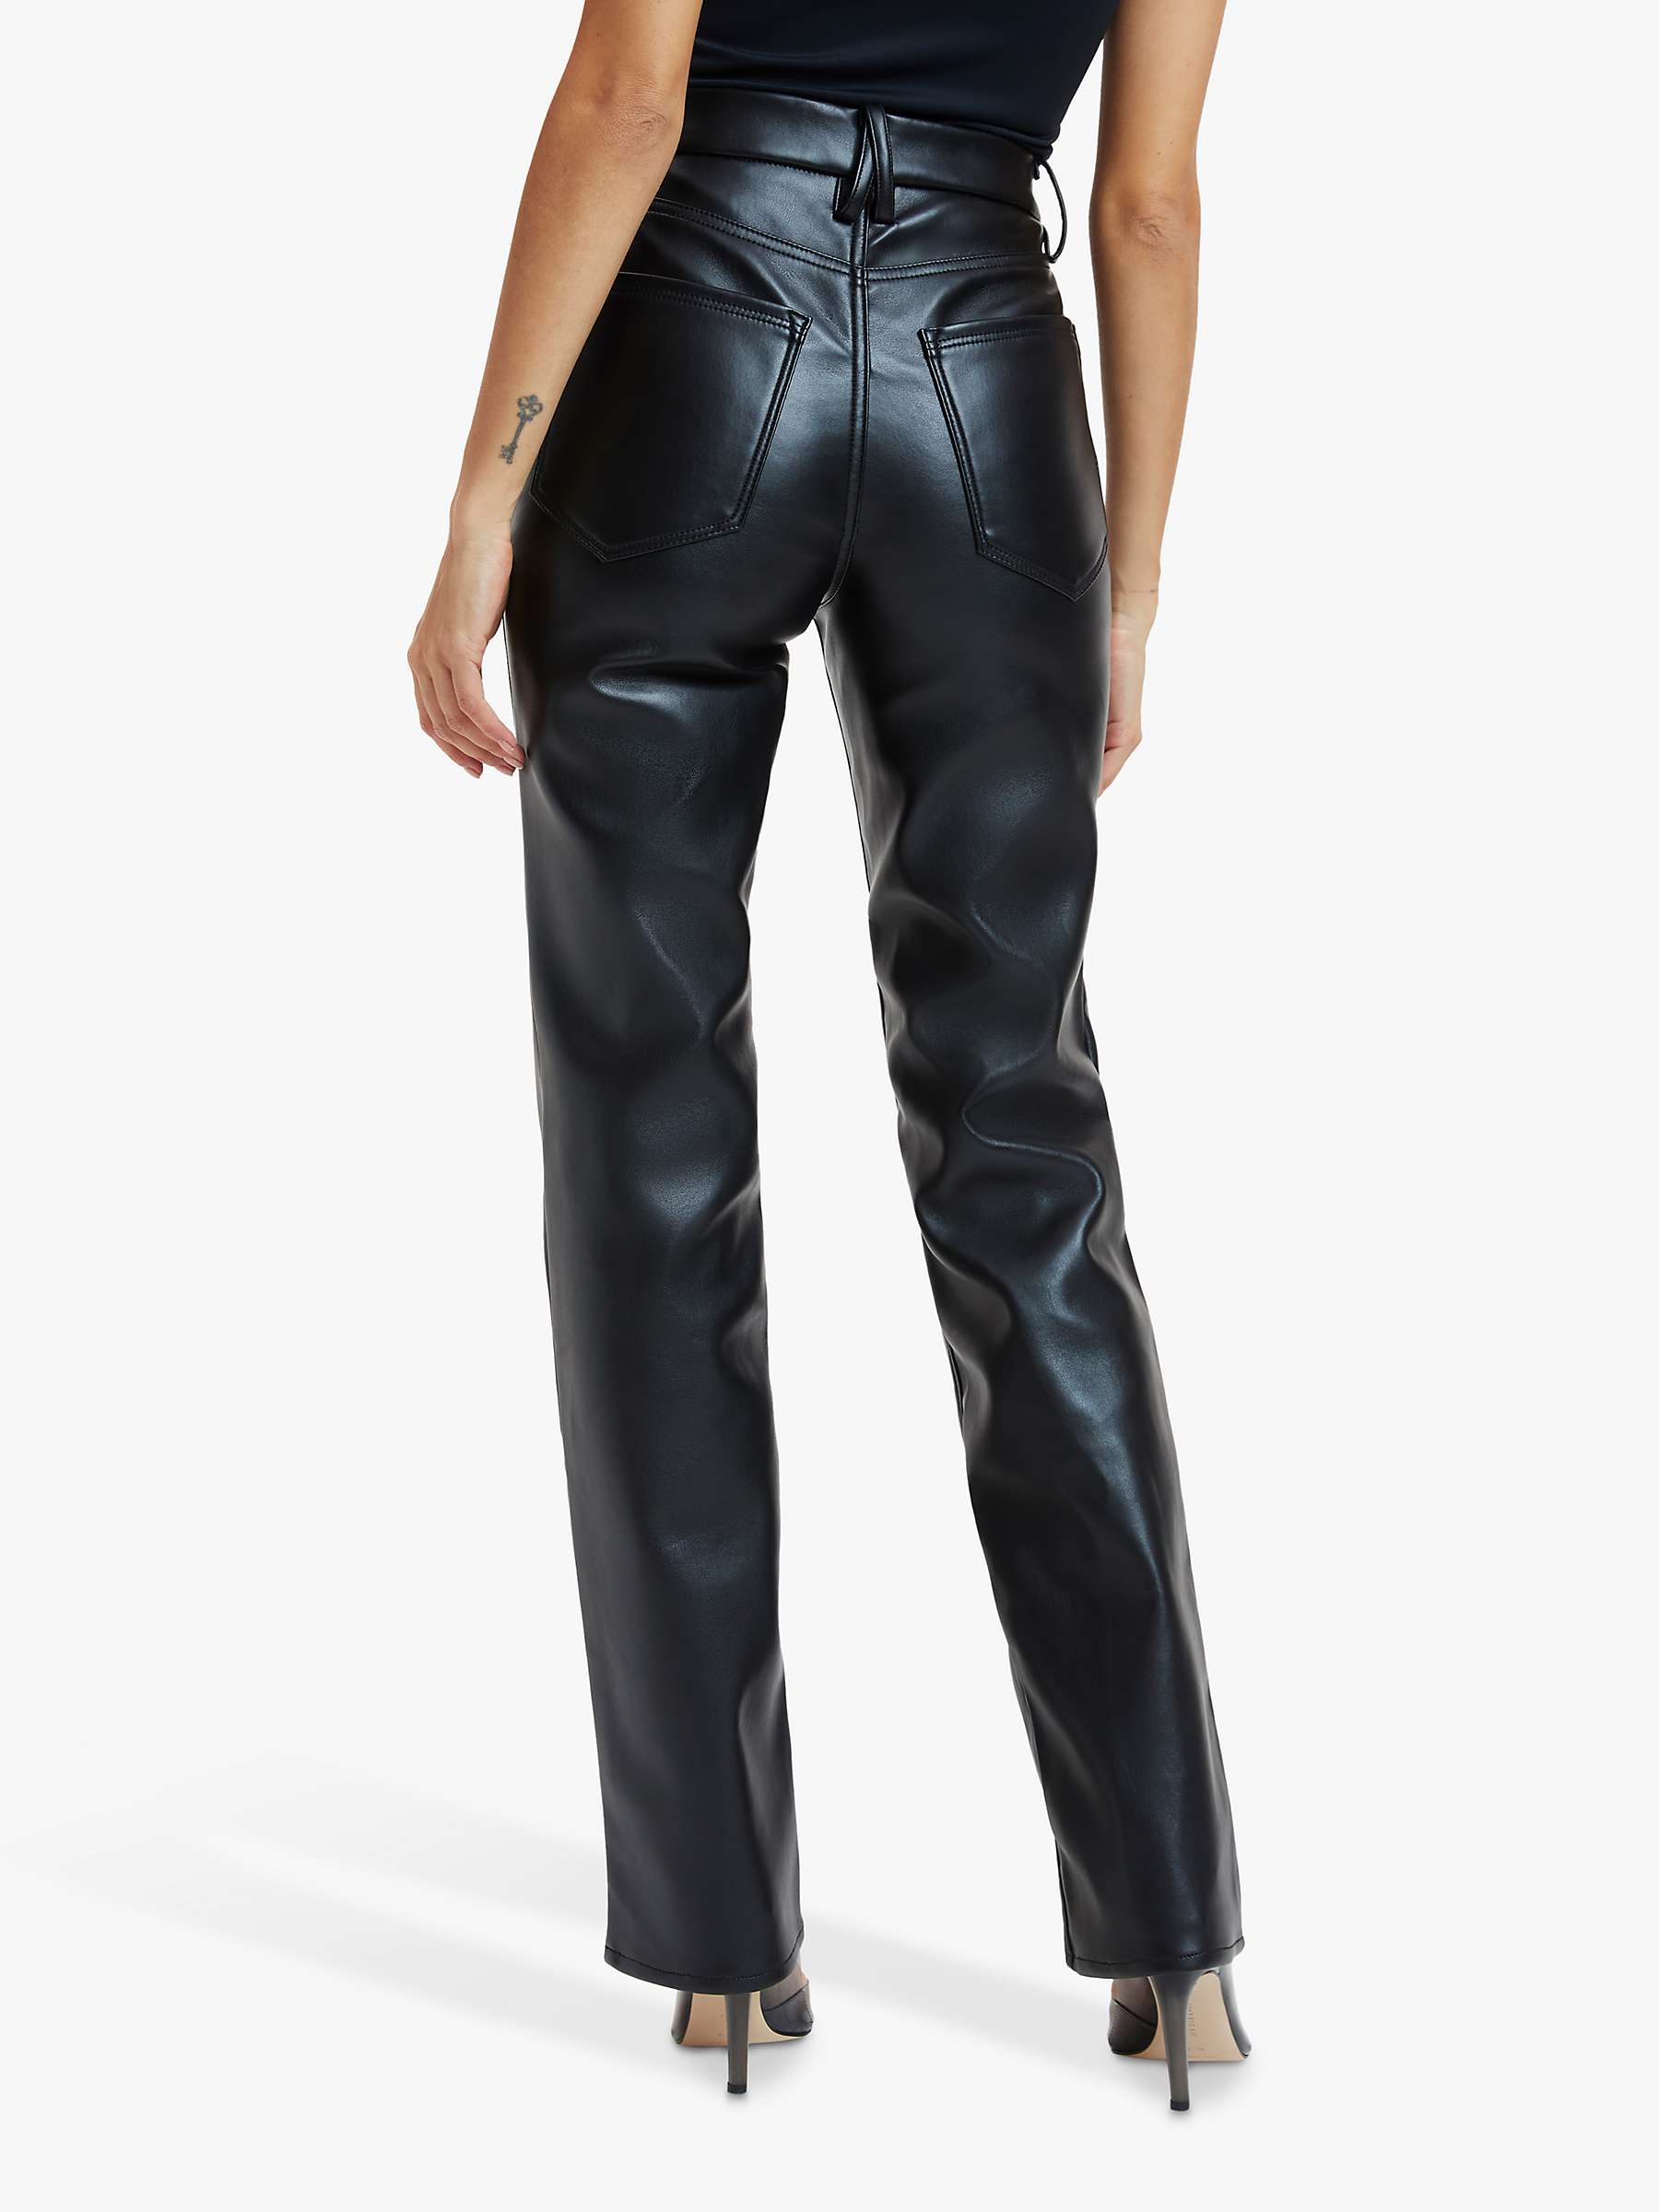 Buy Good American Better Than Leather Straight Cut Jeans Online at johnlewis.com